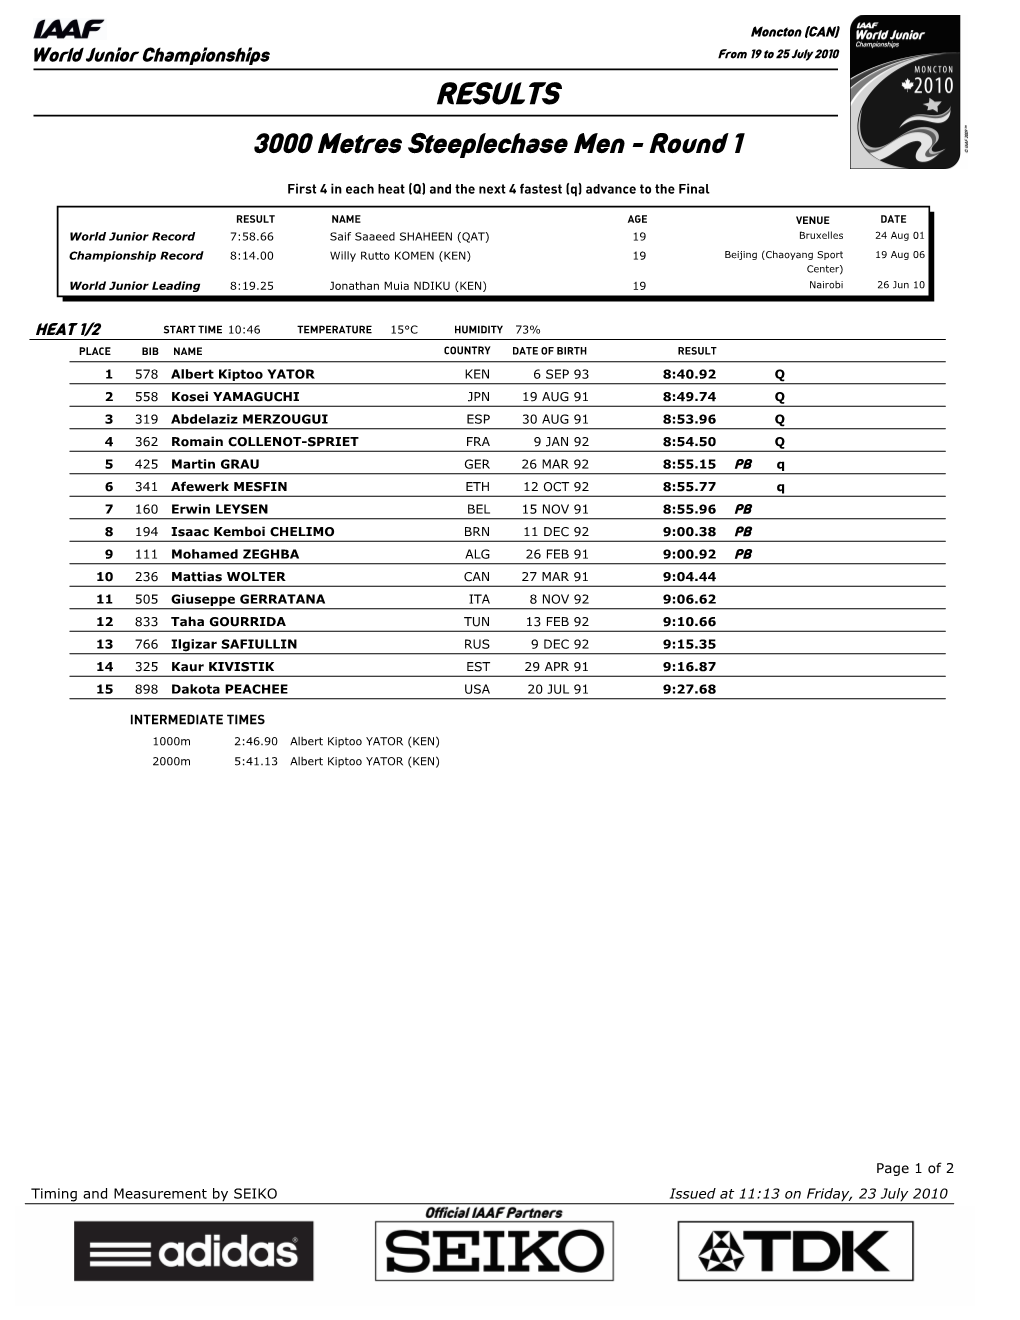 RESULTS 3000 Metres Steeplechase Men - Round 1